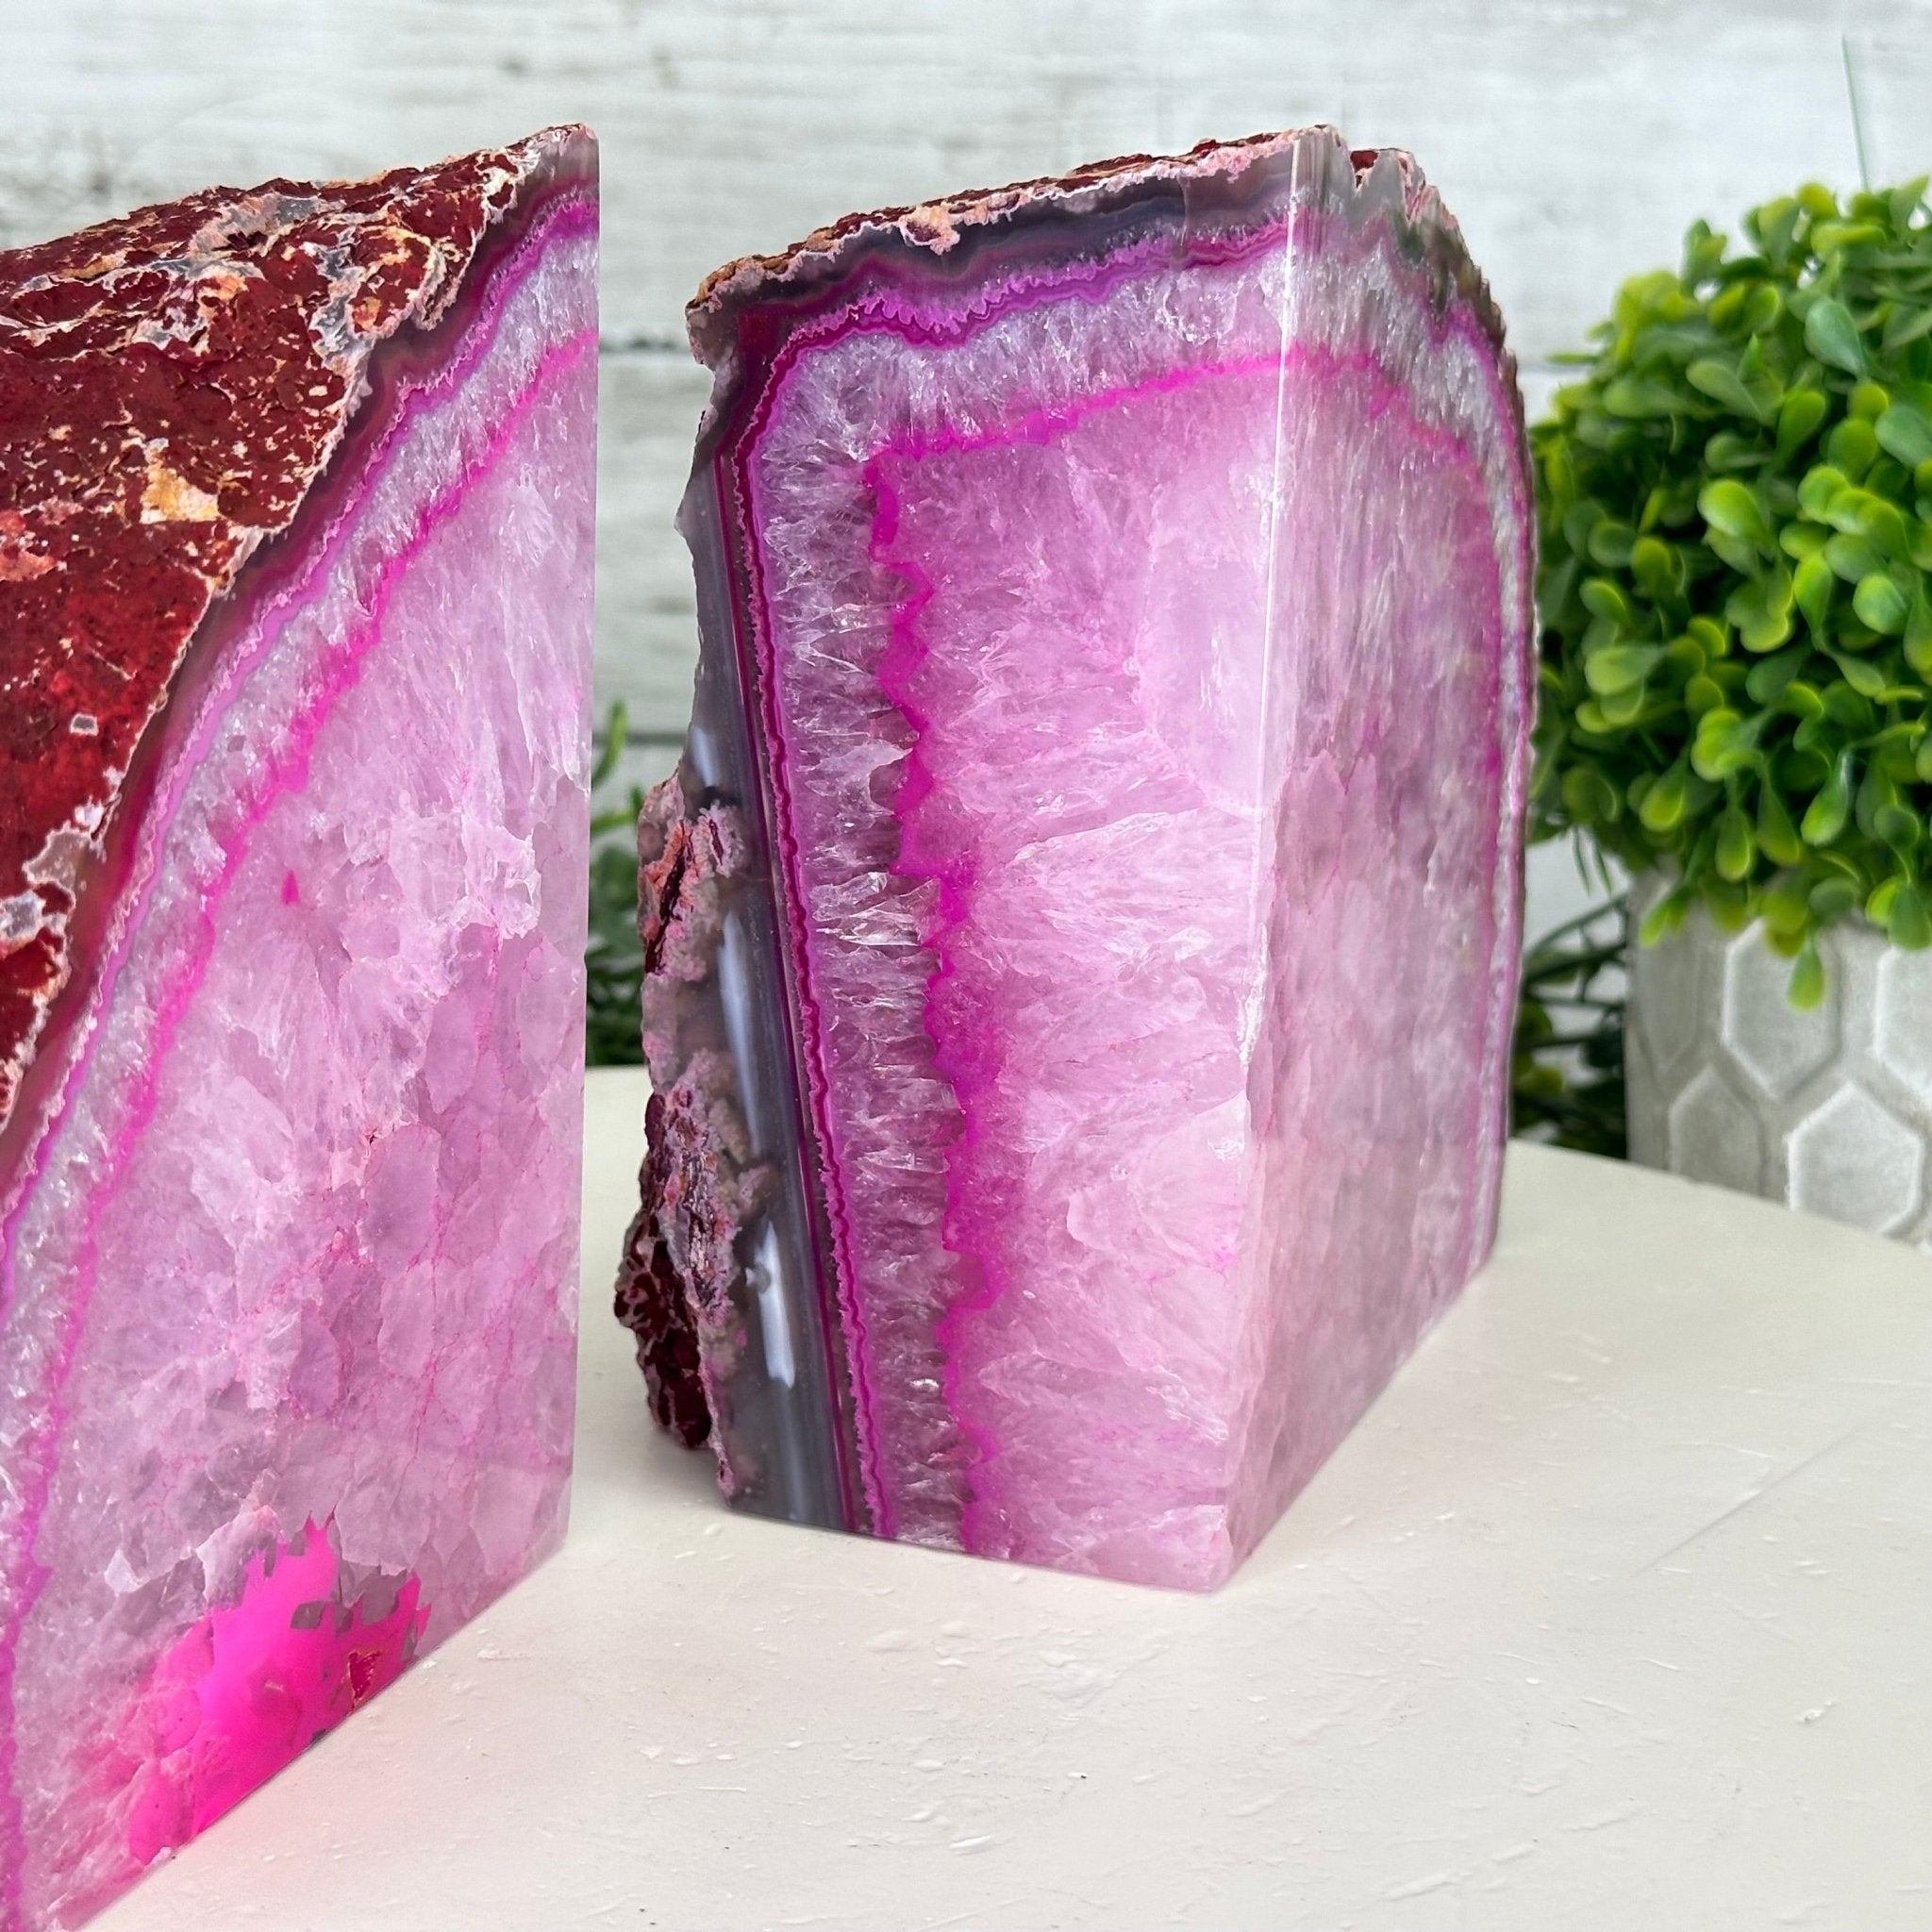 Pink Dyed Brazilian Agate Stone Bookends, 12.7 lbs & 5.9" tall #5151PA-026 - Brazil GemsBrazil GemsPink Dyed Brazilian Agate Stone Bookends, 12.7 lbs & 5.9" tall #5151PA-026Bookends5151PA-026